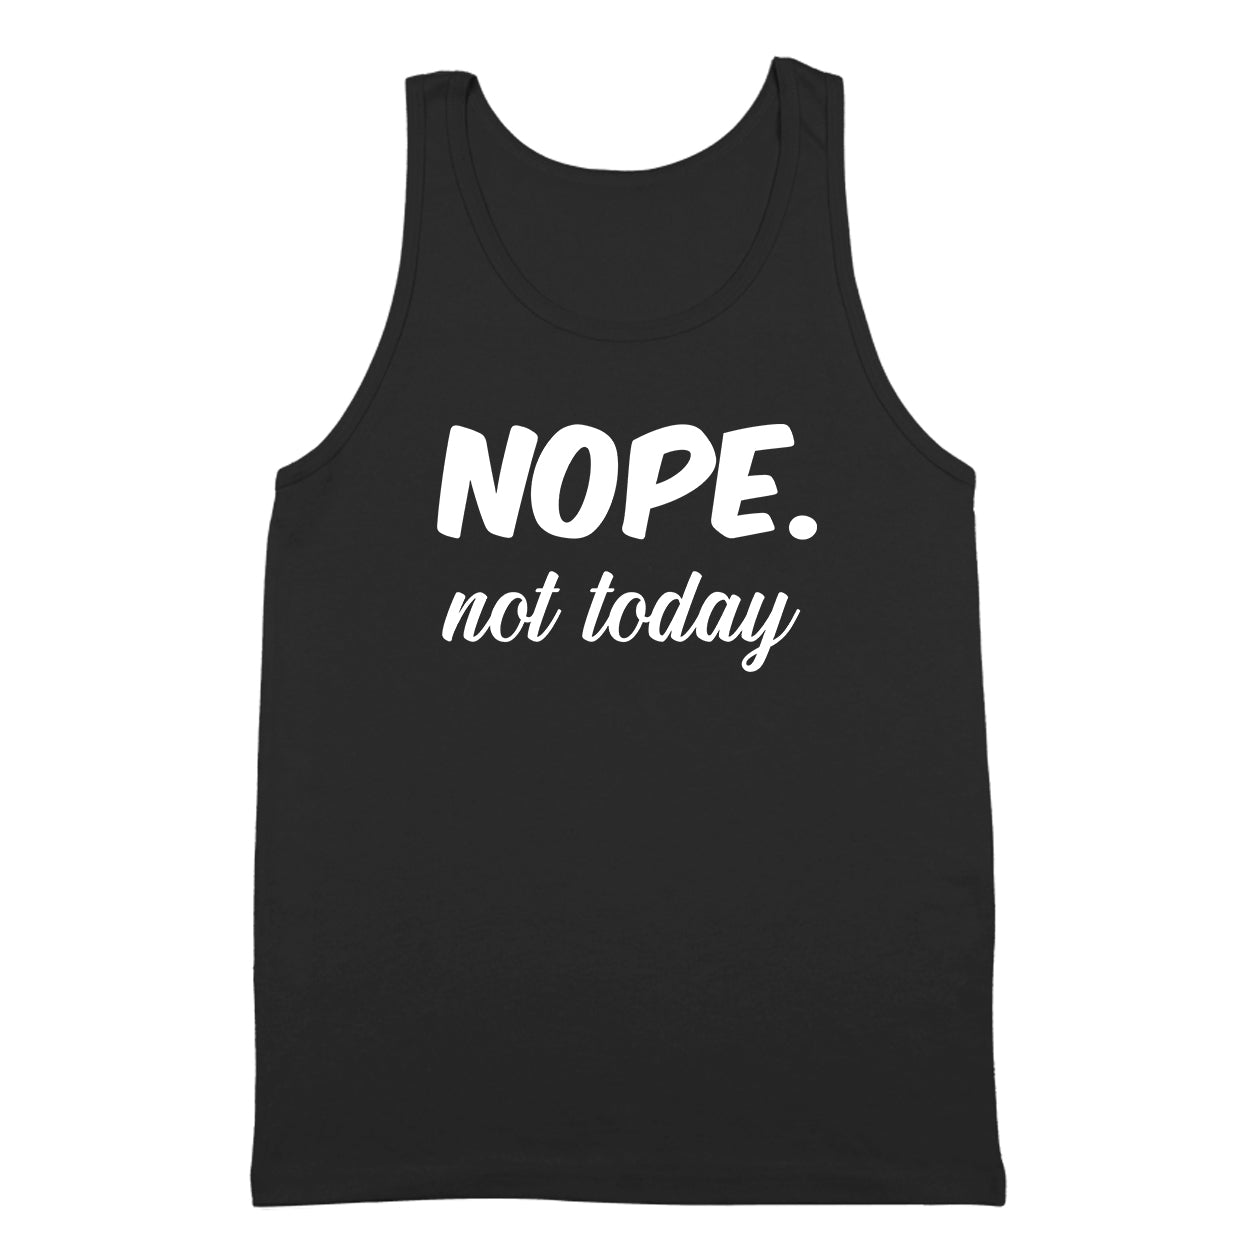 Nope Not today Tshirt - Donkey Tees